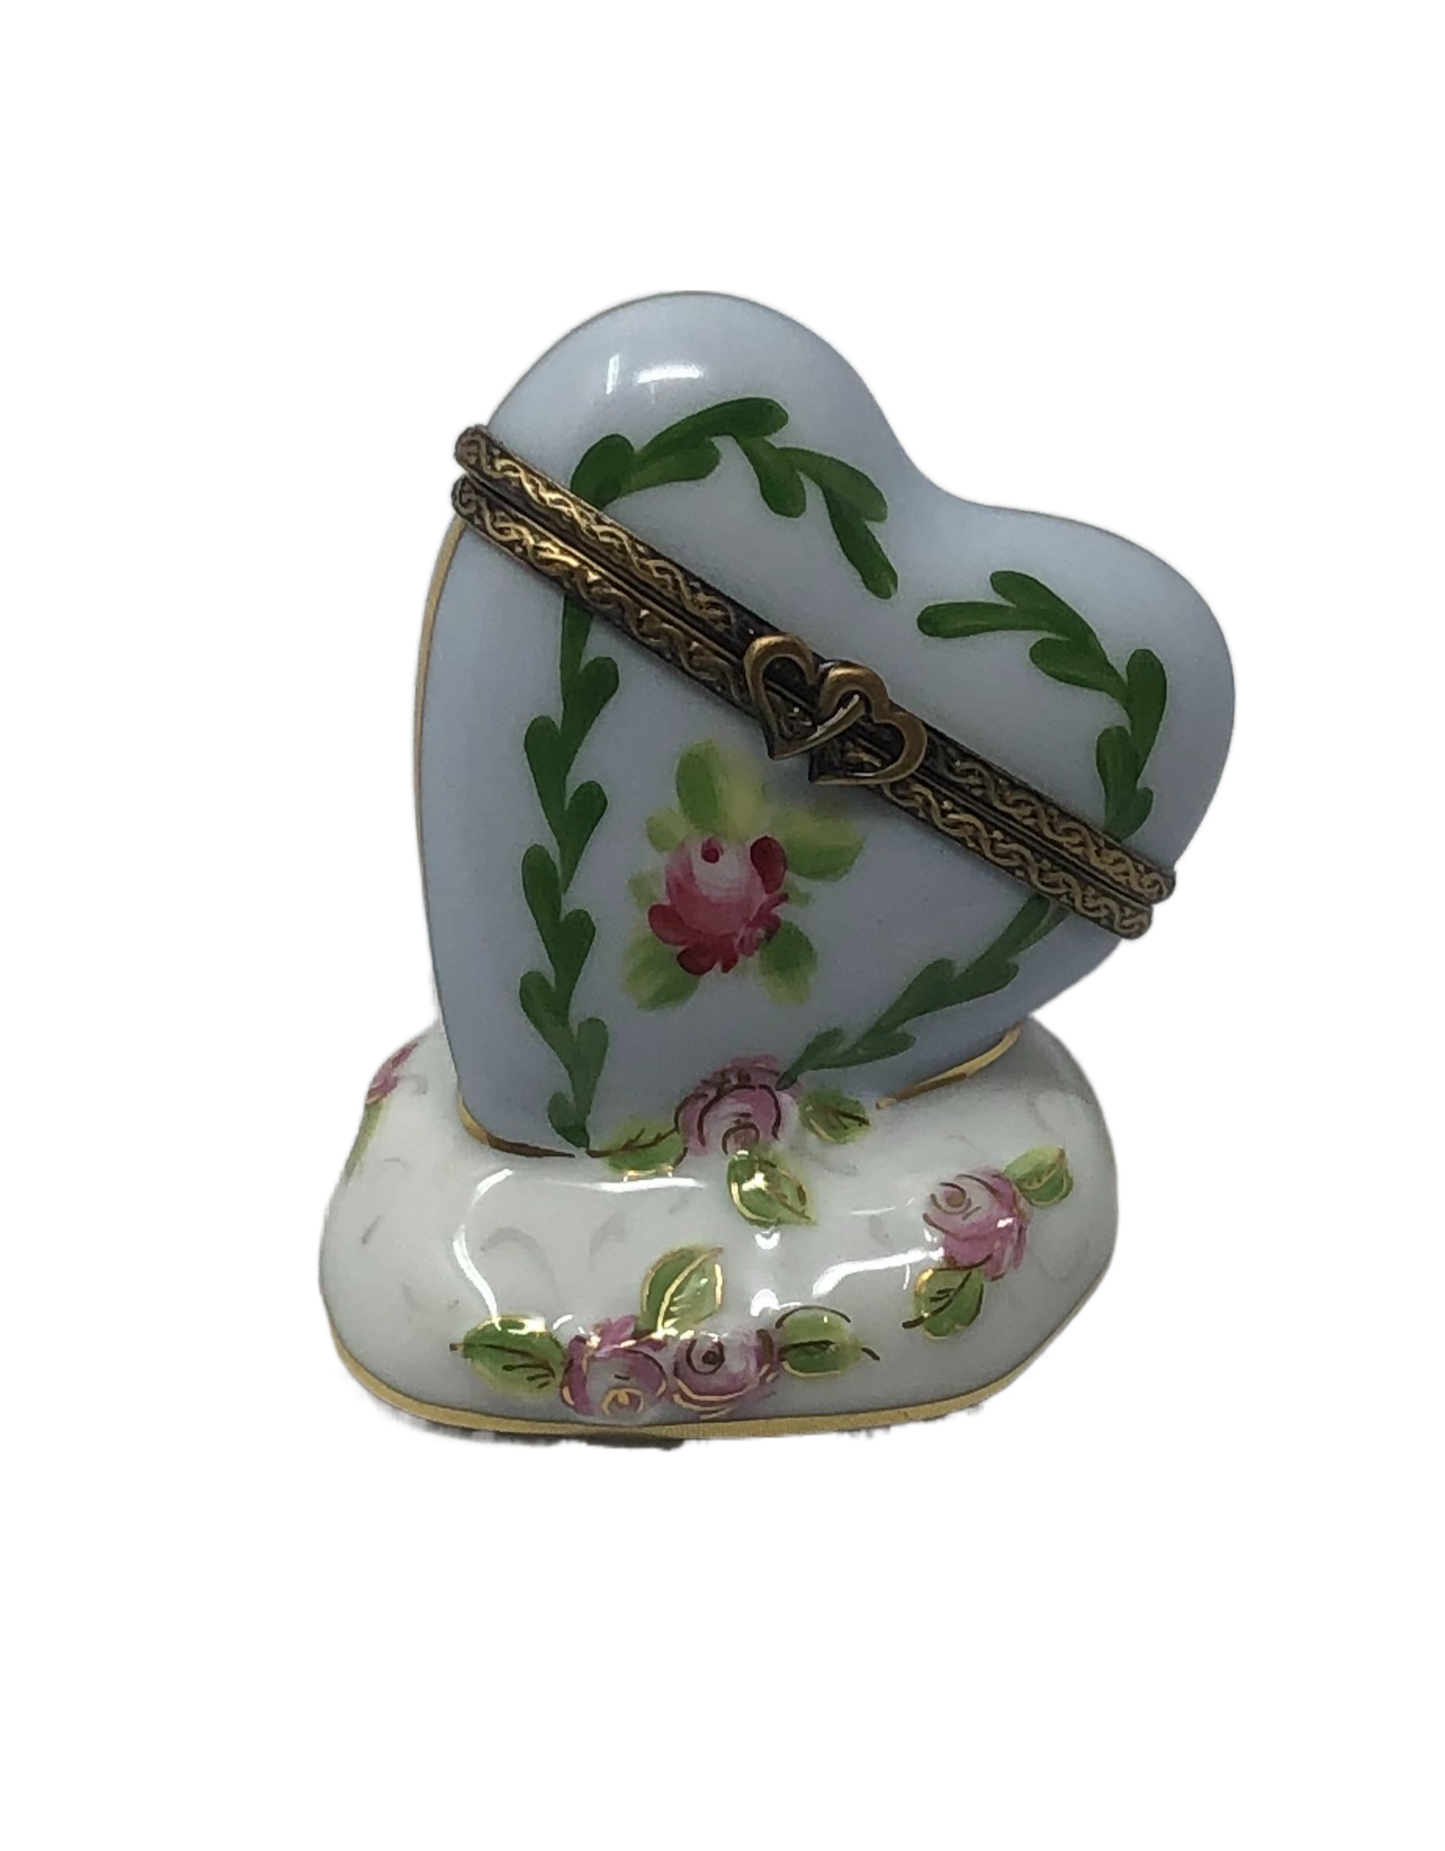 Heavenly Roses - Hand-Painted Heart Limoges Box